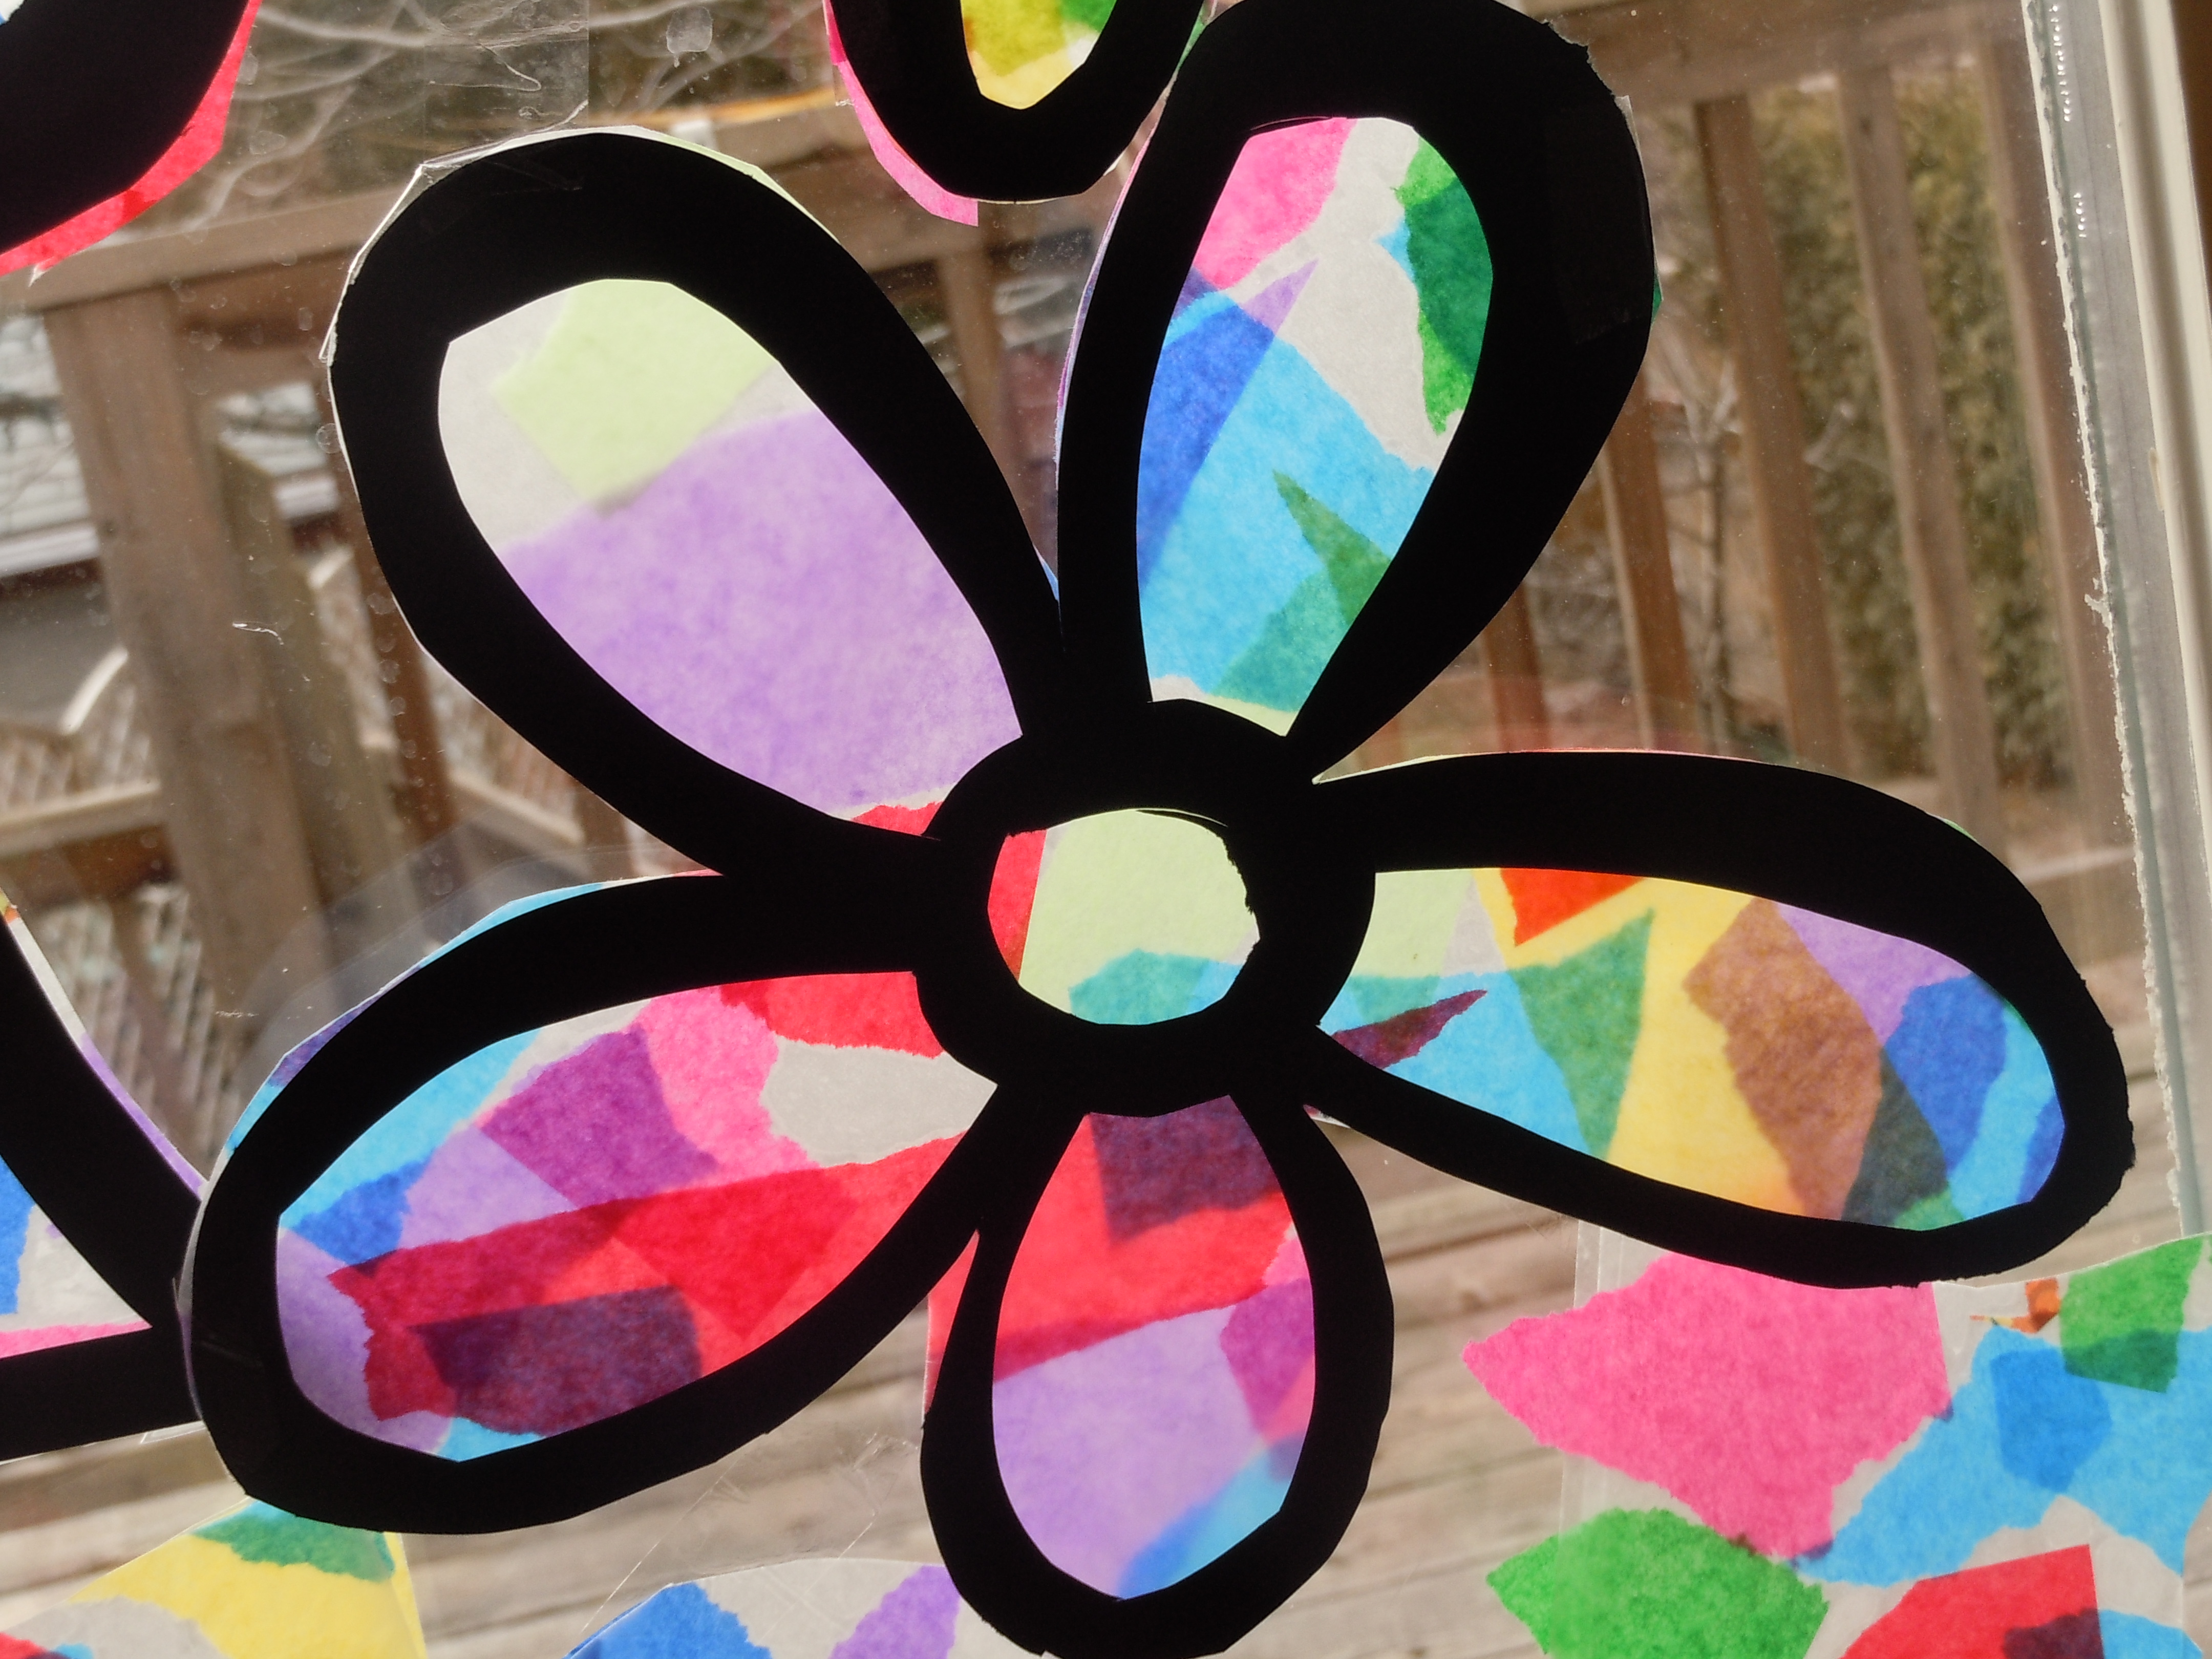 Cindy deRosier: My Creative Life: Tissue Paper Stained Glass